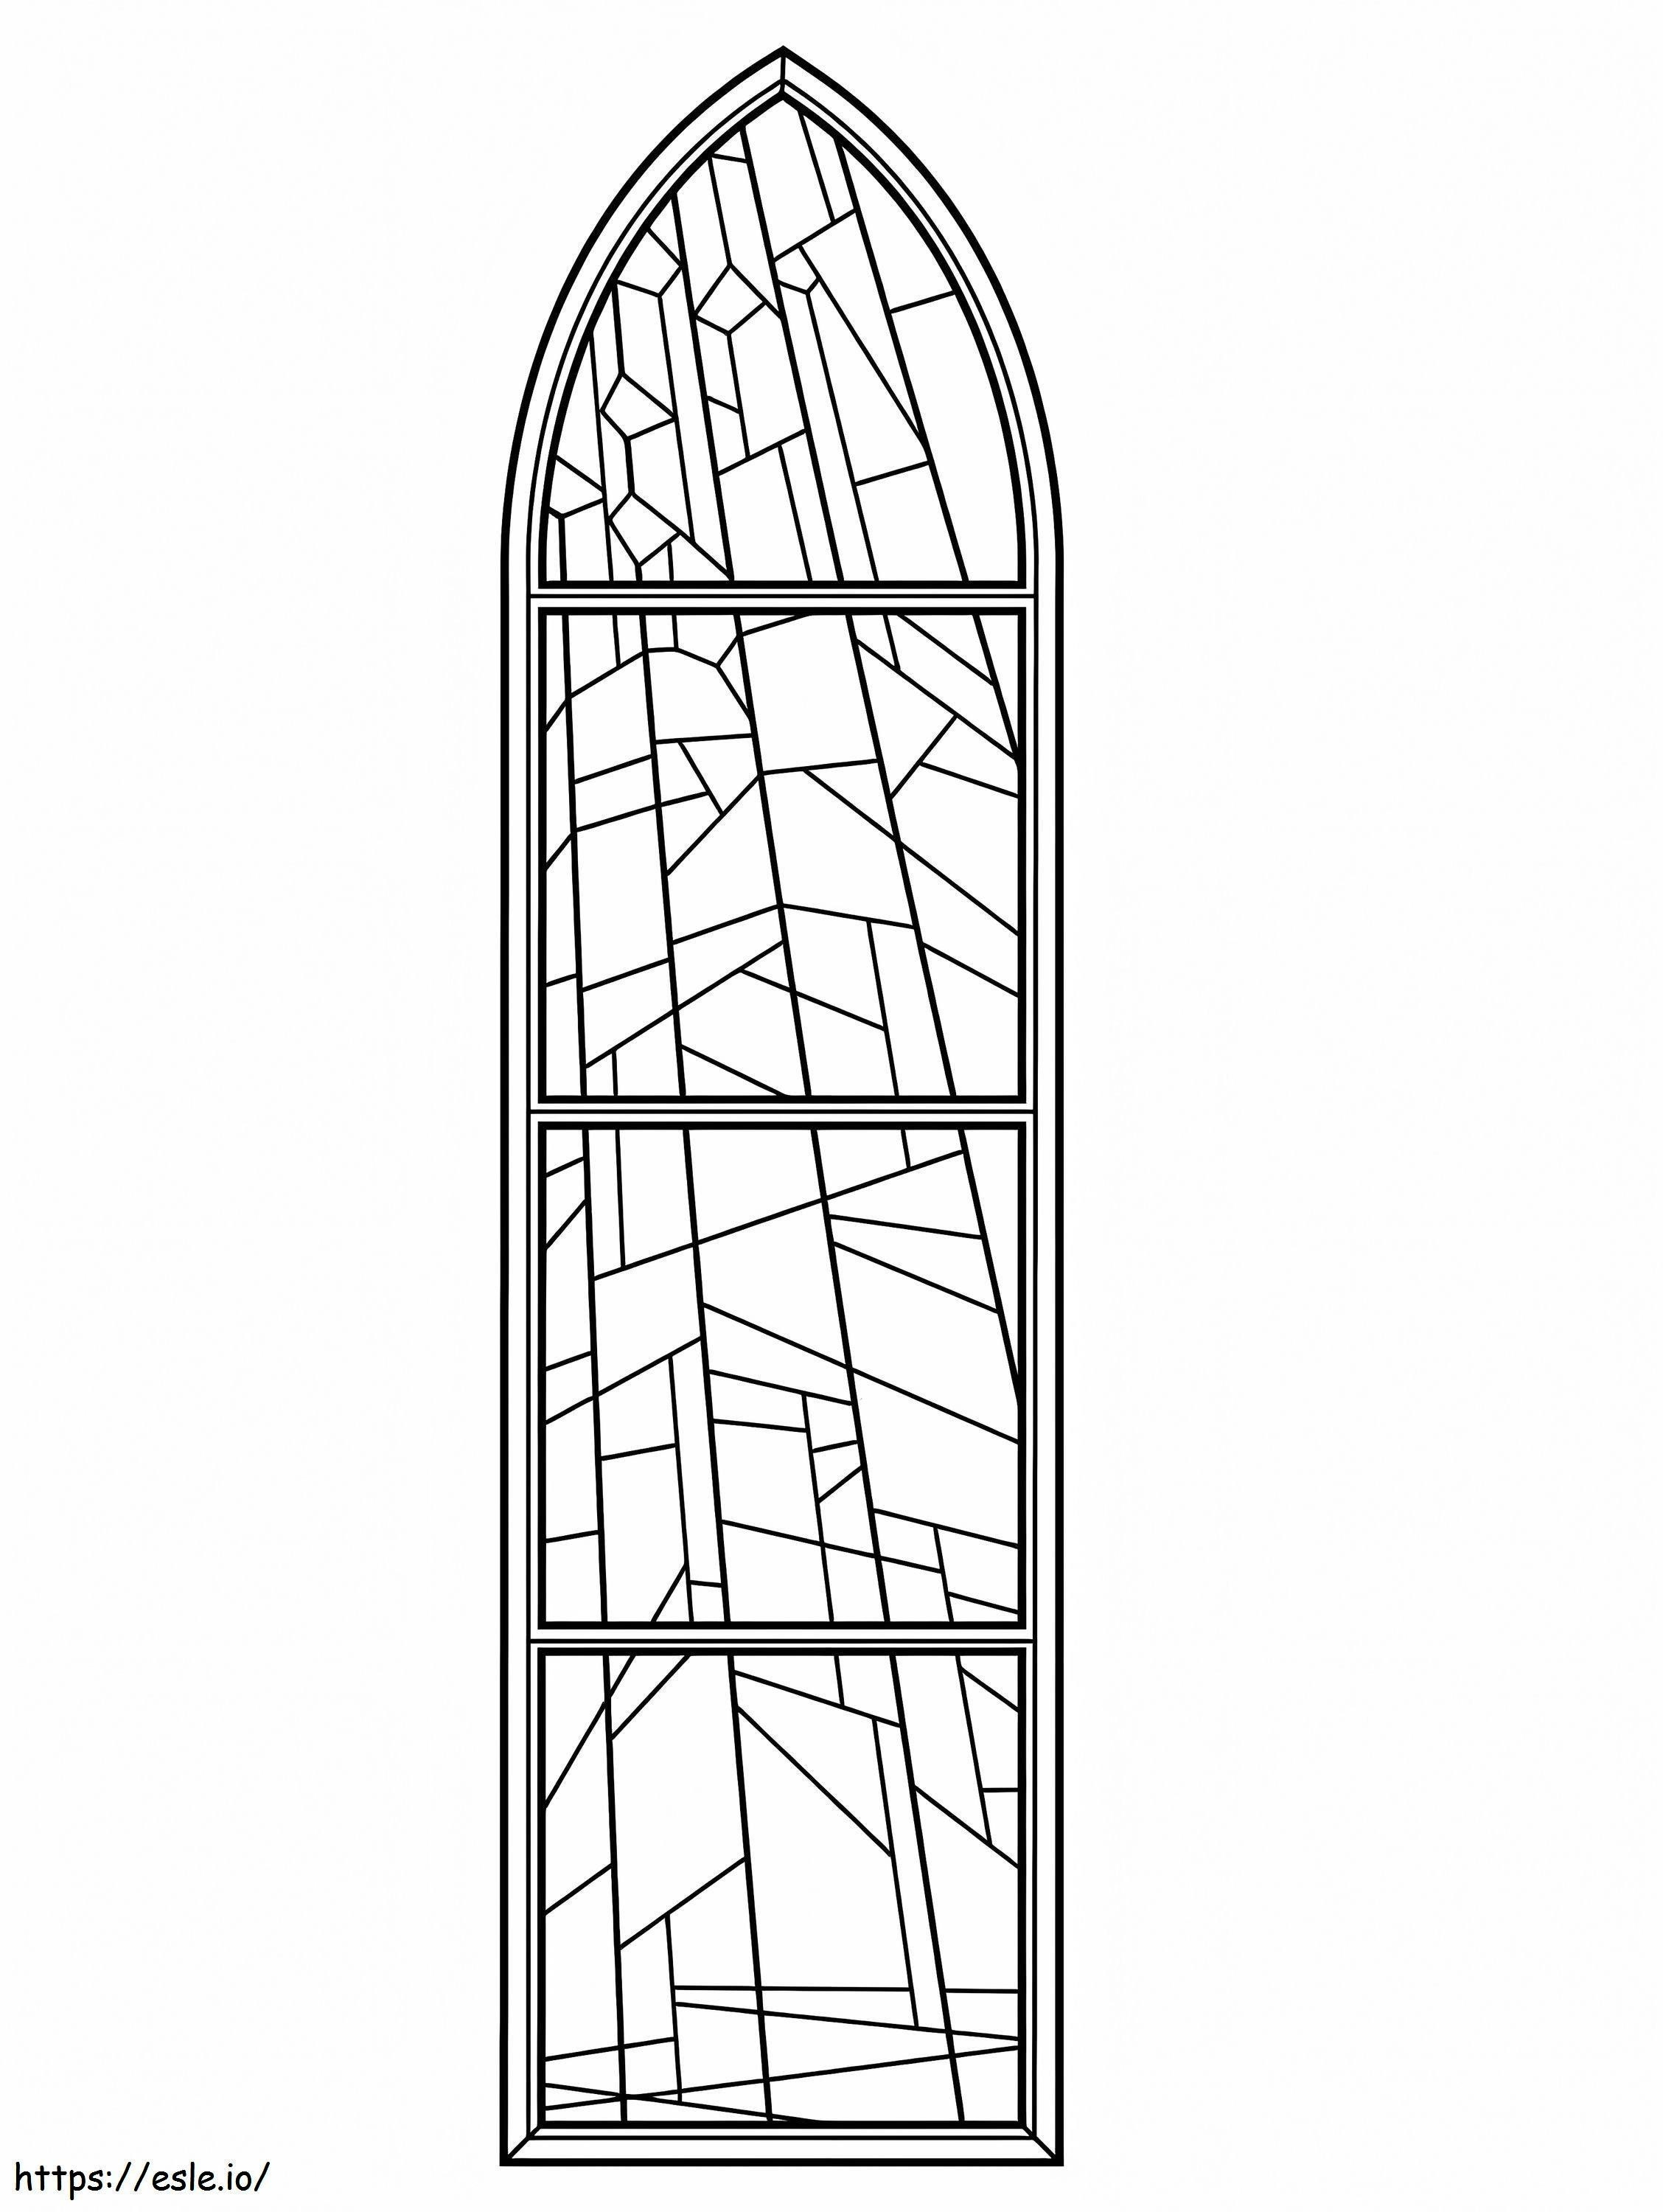 Stained Glass Window 1 coloring page